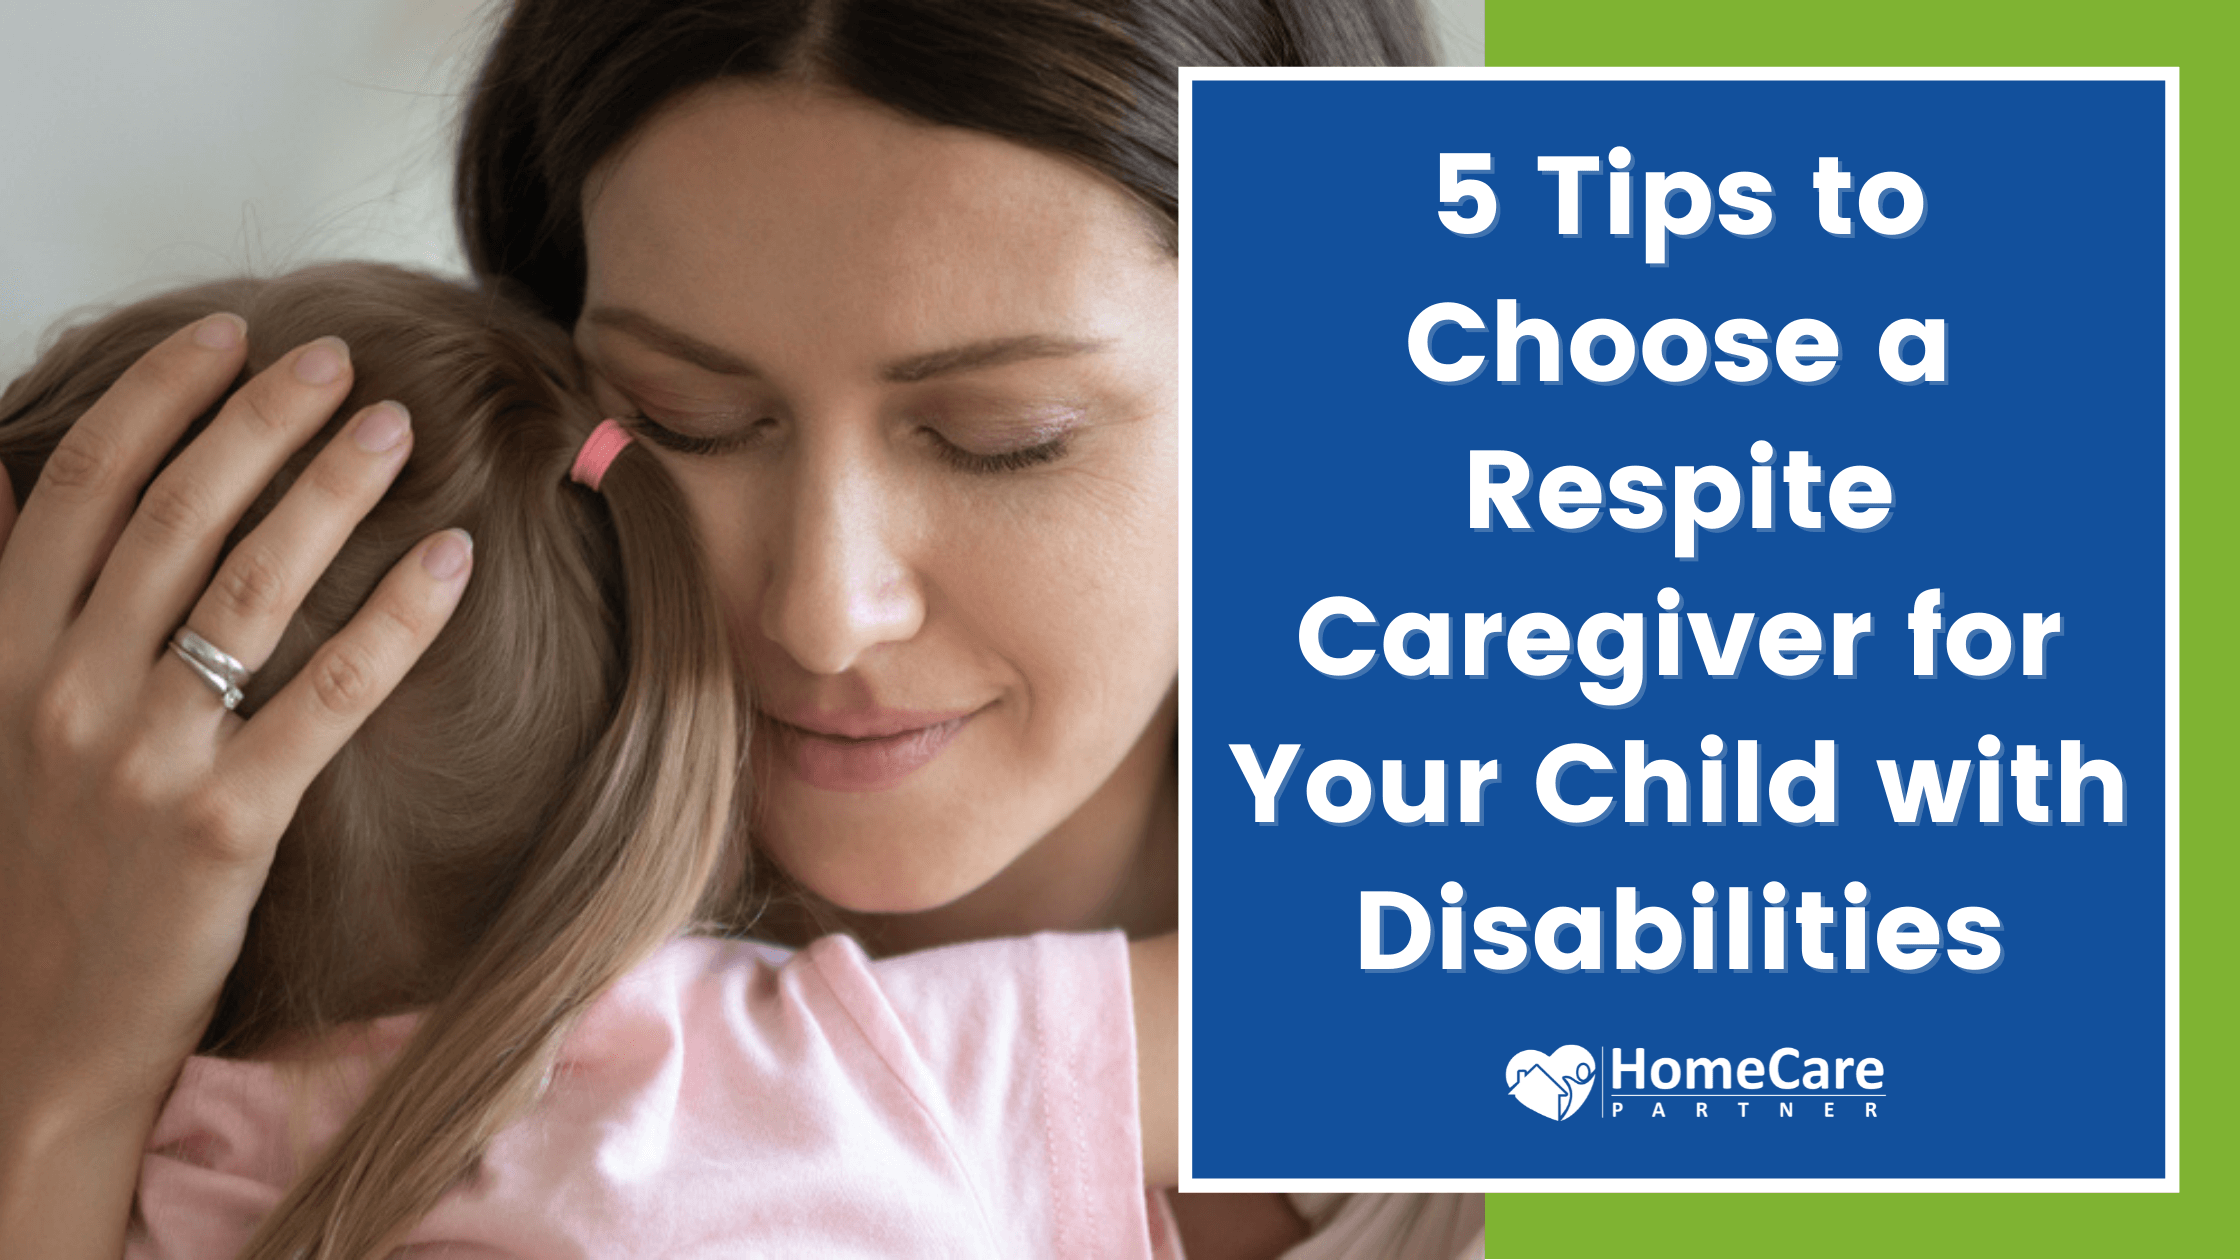 5 Tips to Choose a Respite Caregiver for Your Child with Disabilities